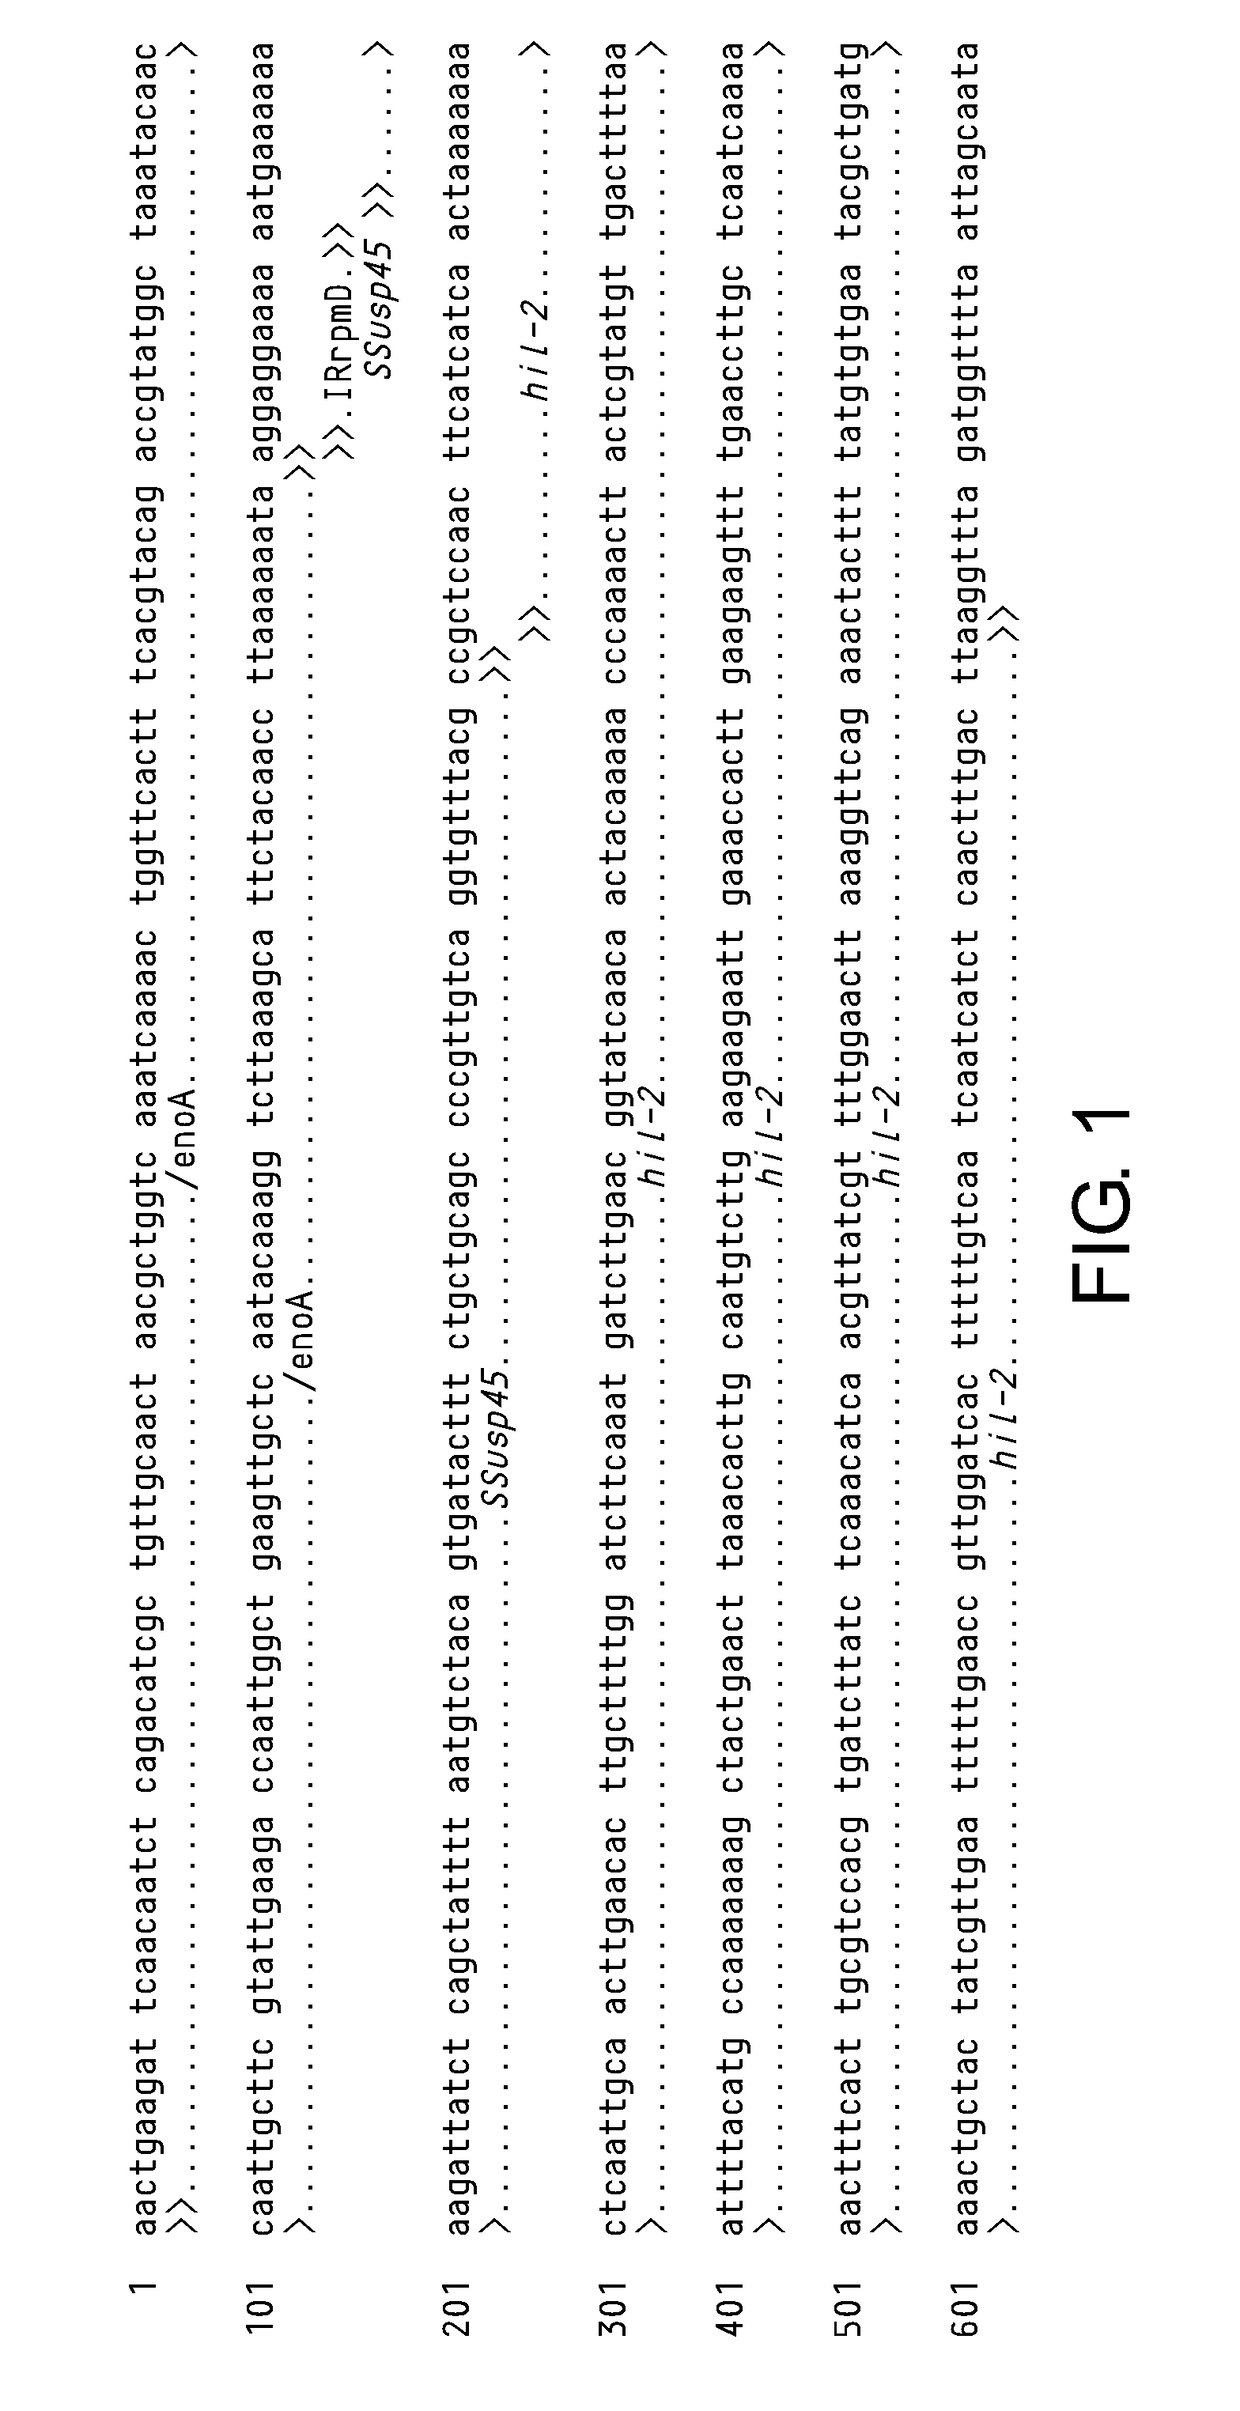 Compositions and methods for the treatment of type 1 diabetes